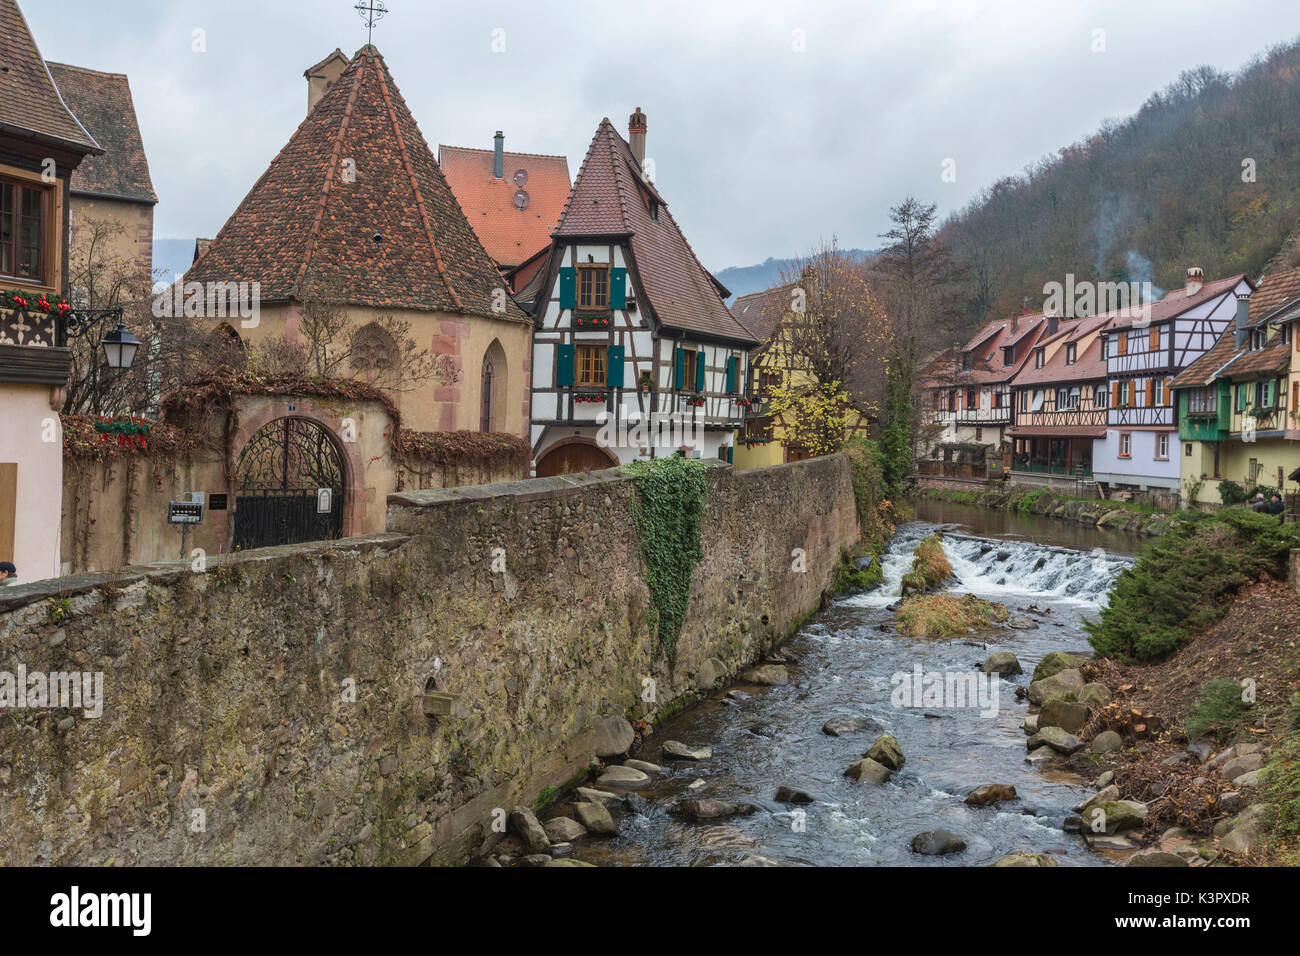 Typical architecture of the old medieval town and bridge on river Weiss Kaysersberg Haut-Rhin department Alsace France Europe Stock Photo